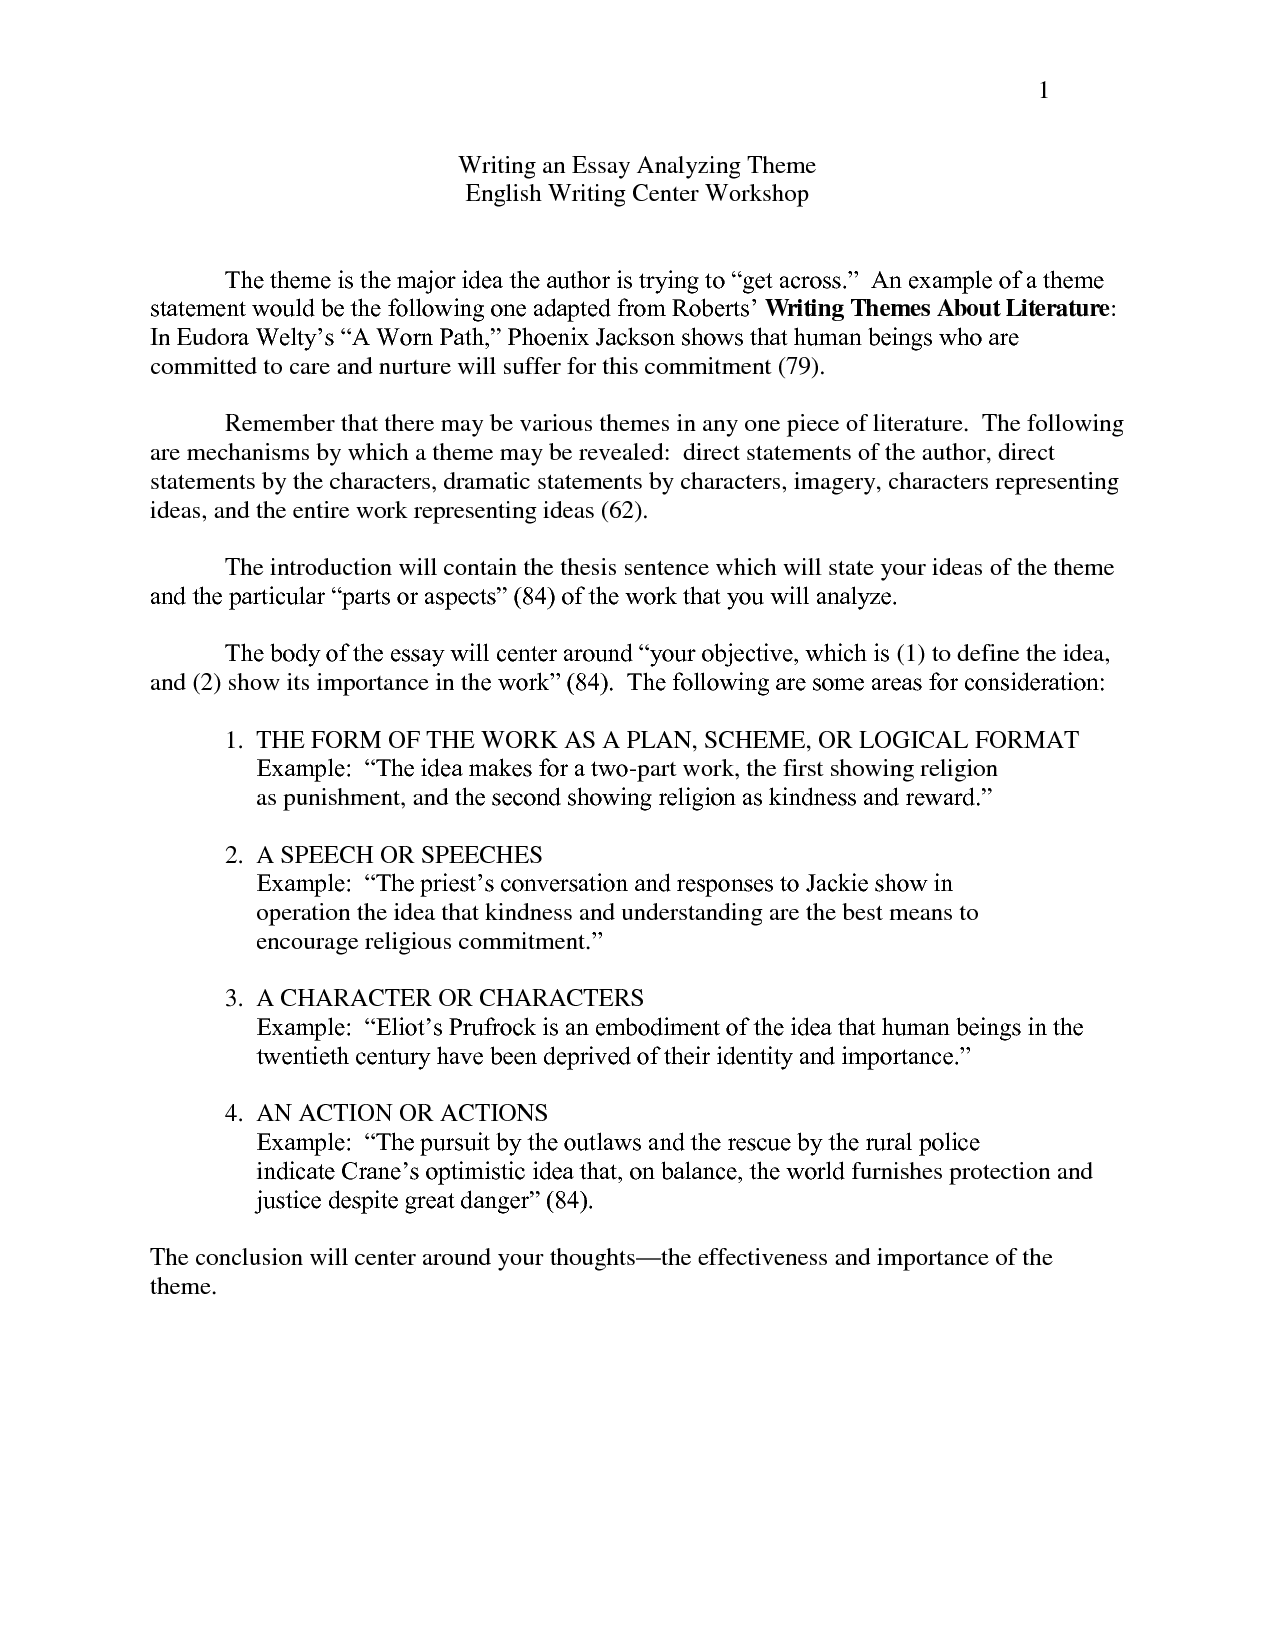 How to Write a Thematic Essay (Theme Essay) with Examples